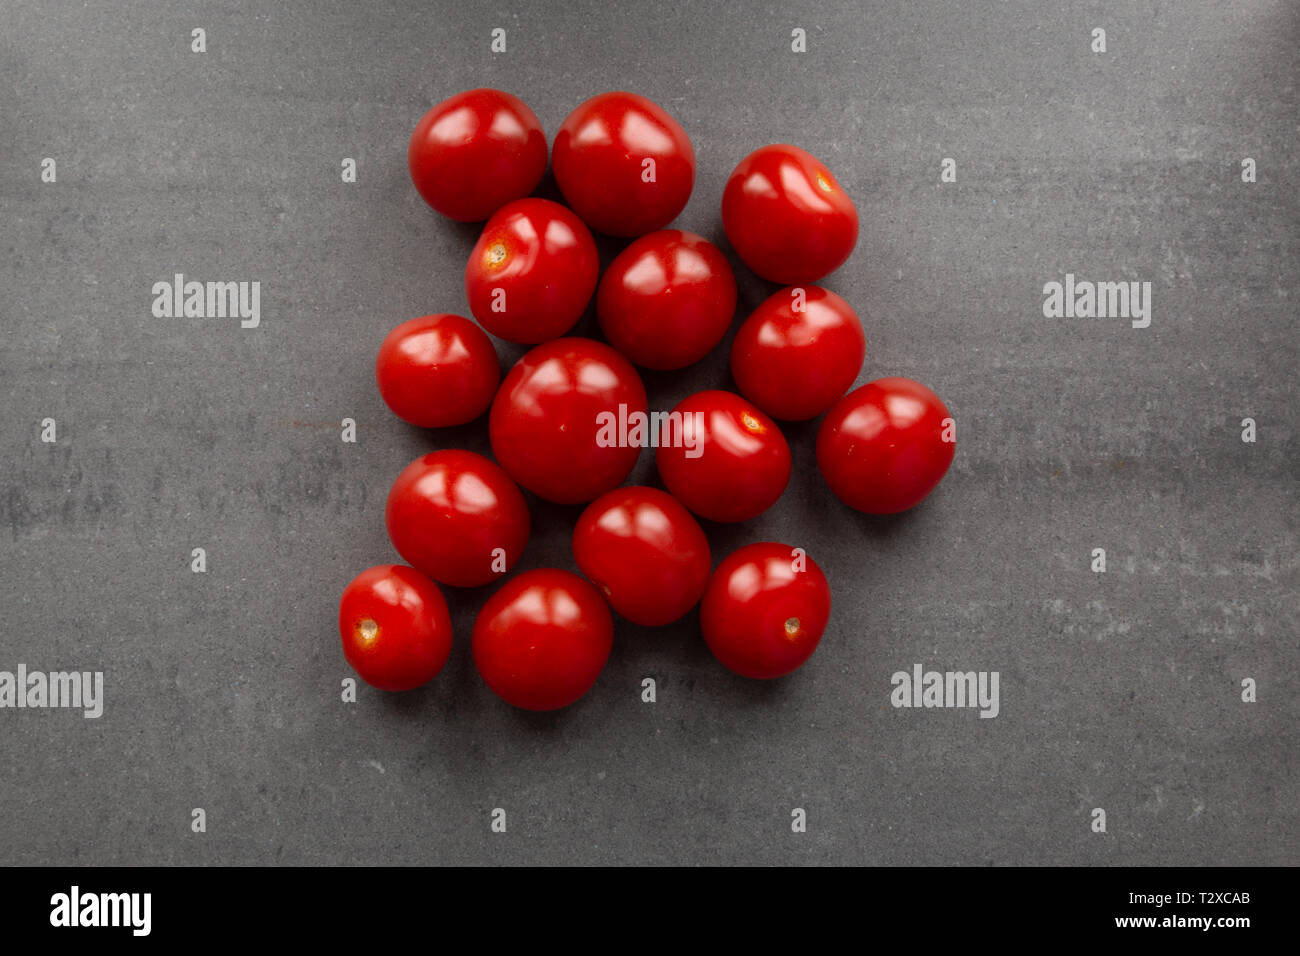 Red cherry tomatoes in center of frame. gray stone background. Stock Photo